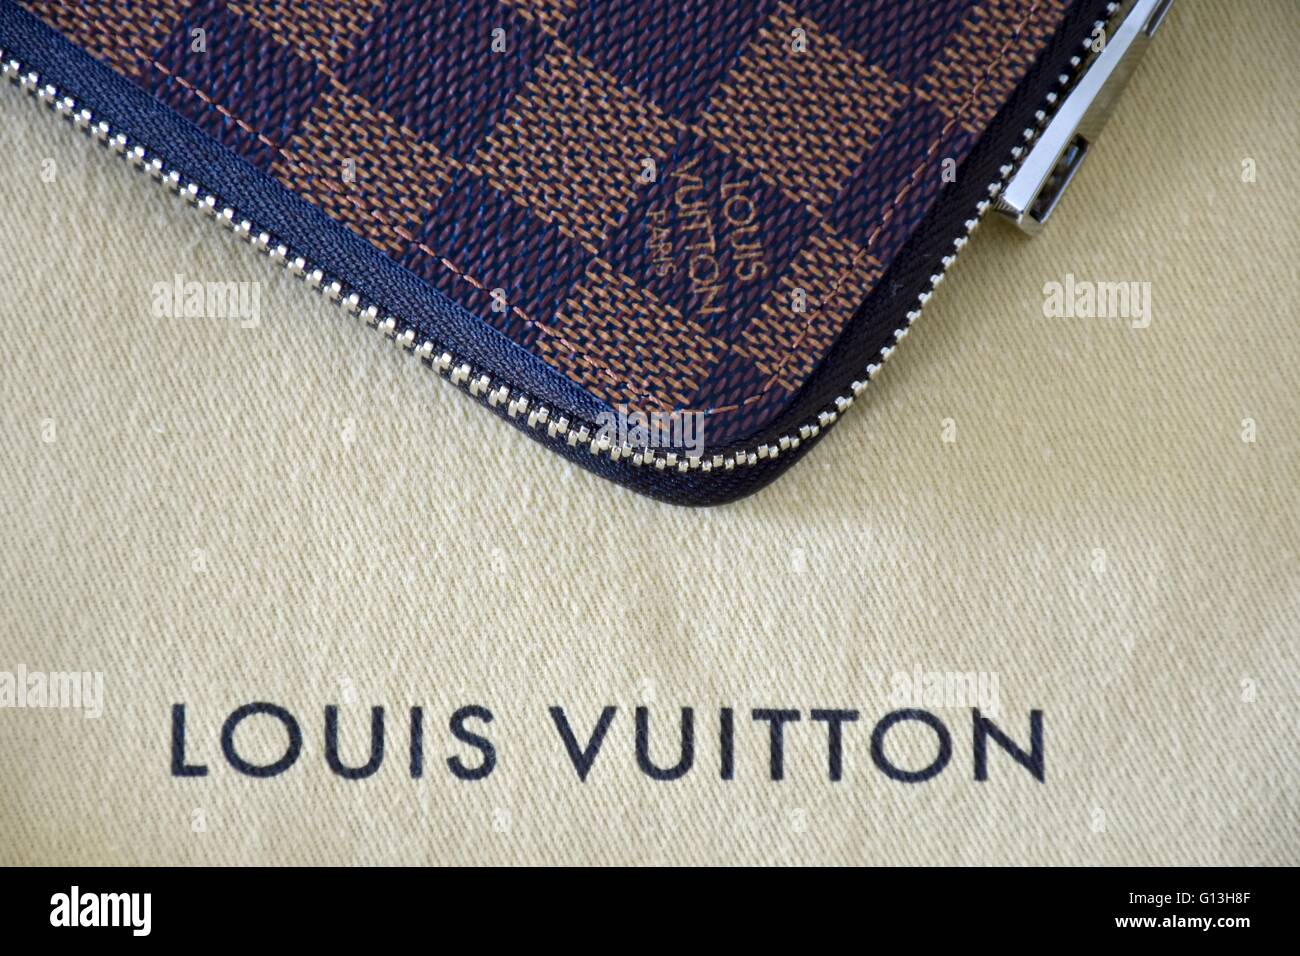 Pin by IG: CurlyByNature_ on Babe (Outfits)  Louis vuitton mens wallet, Louis  vuitton men, Louis vuitton wallet